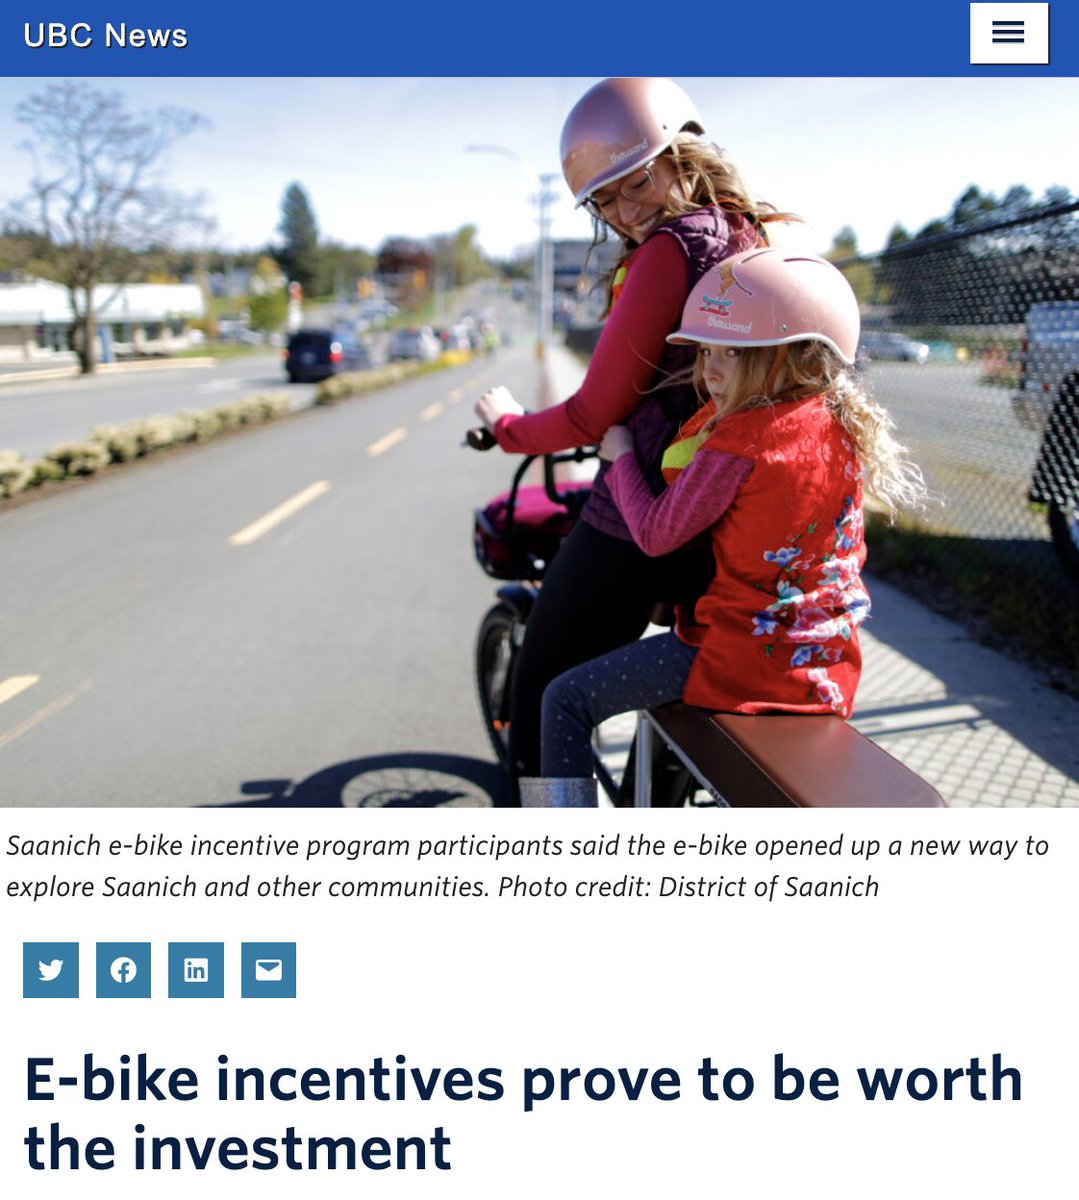 Encouraging new research on e-bike incentives: In Saanich, British Columbia, 93% of rebate recipients were new to e-e-biking, and 60% new to cycling altogether. news.ubc.ca/2024/04/30/e-b…